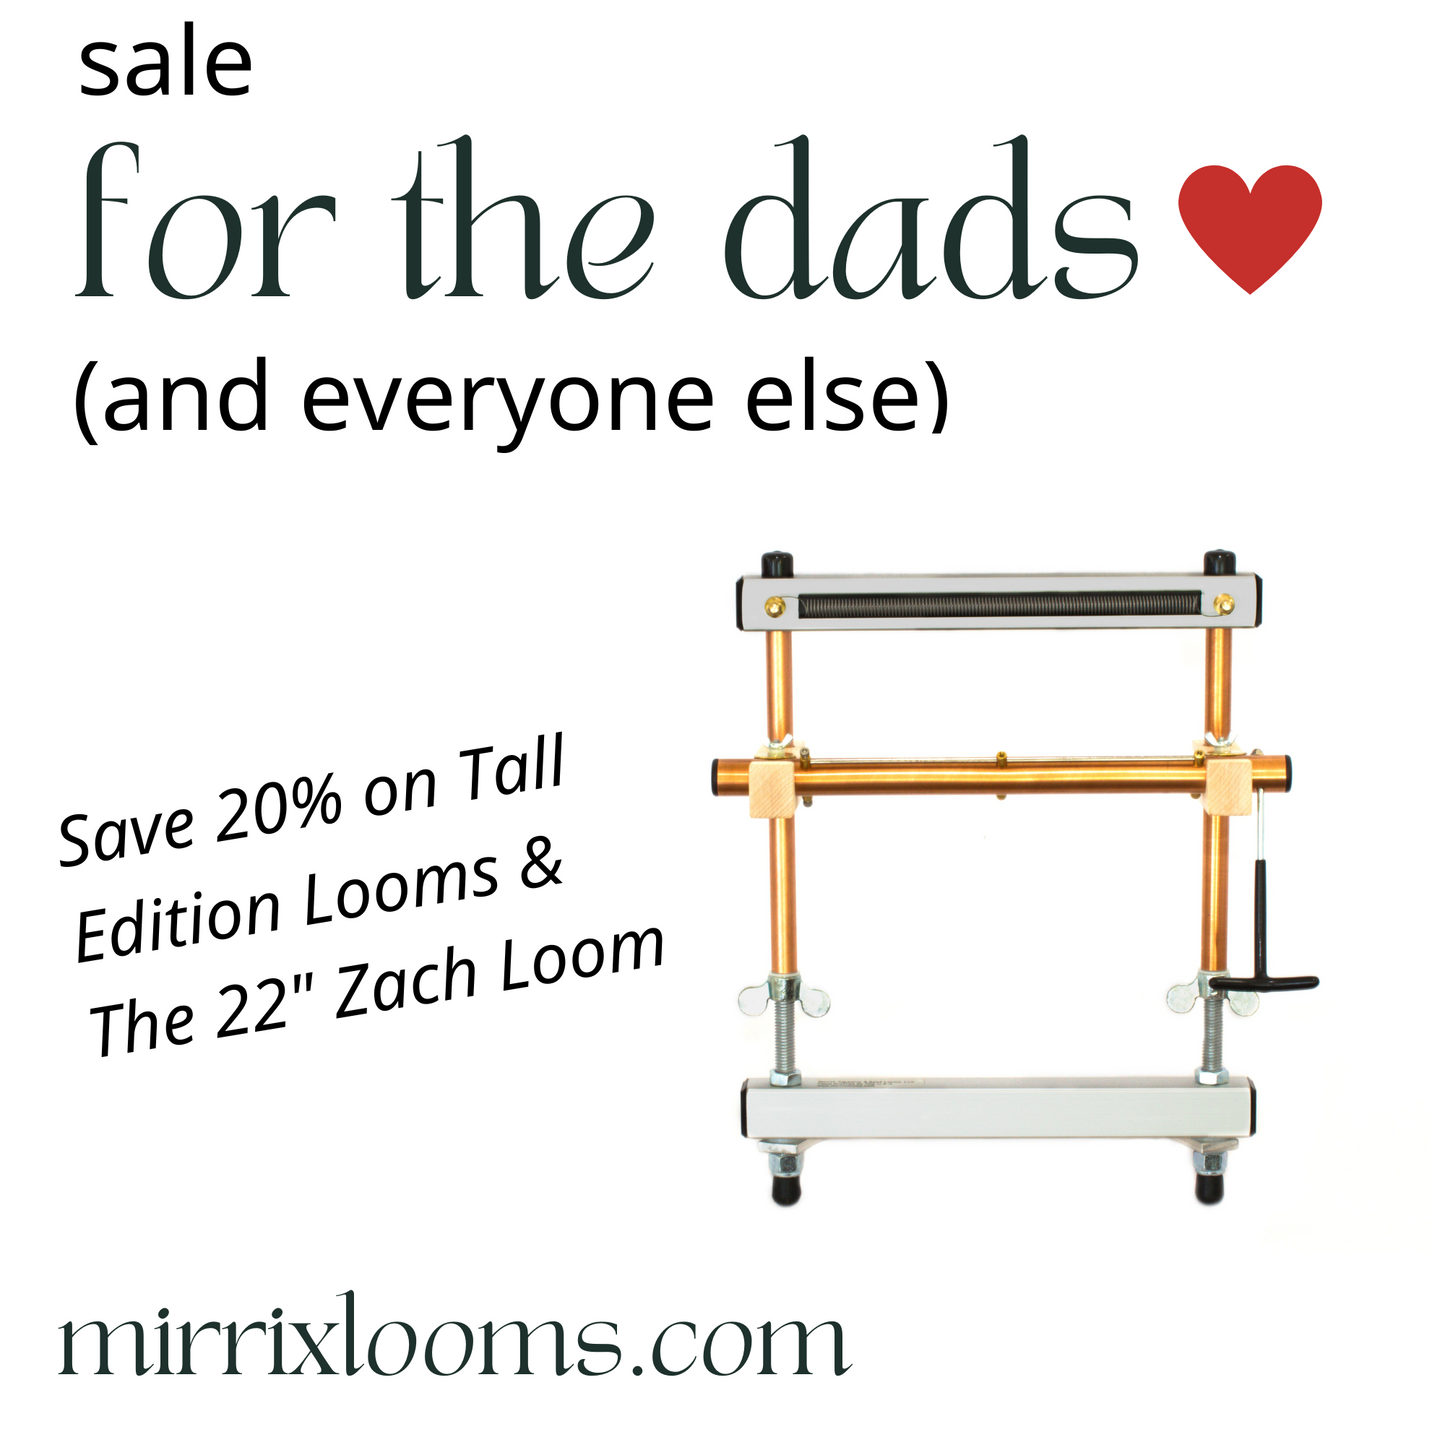 Sale For The Dads